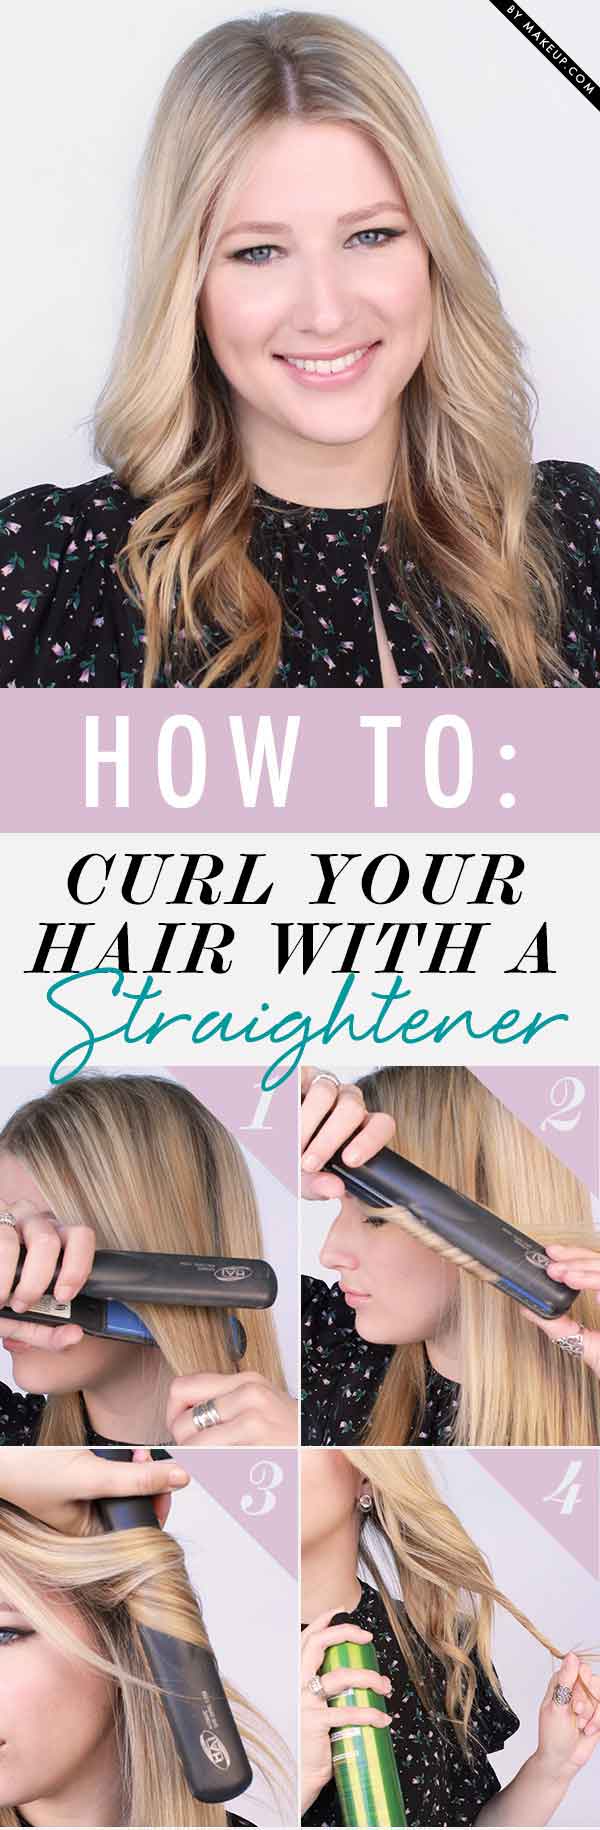 how_to_curl_your_hair_with_a_straightener-b